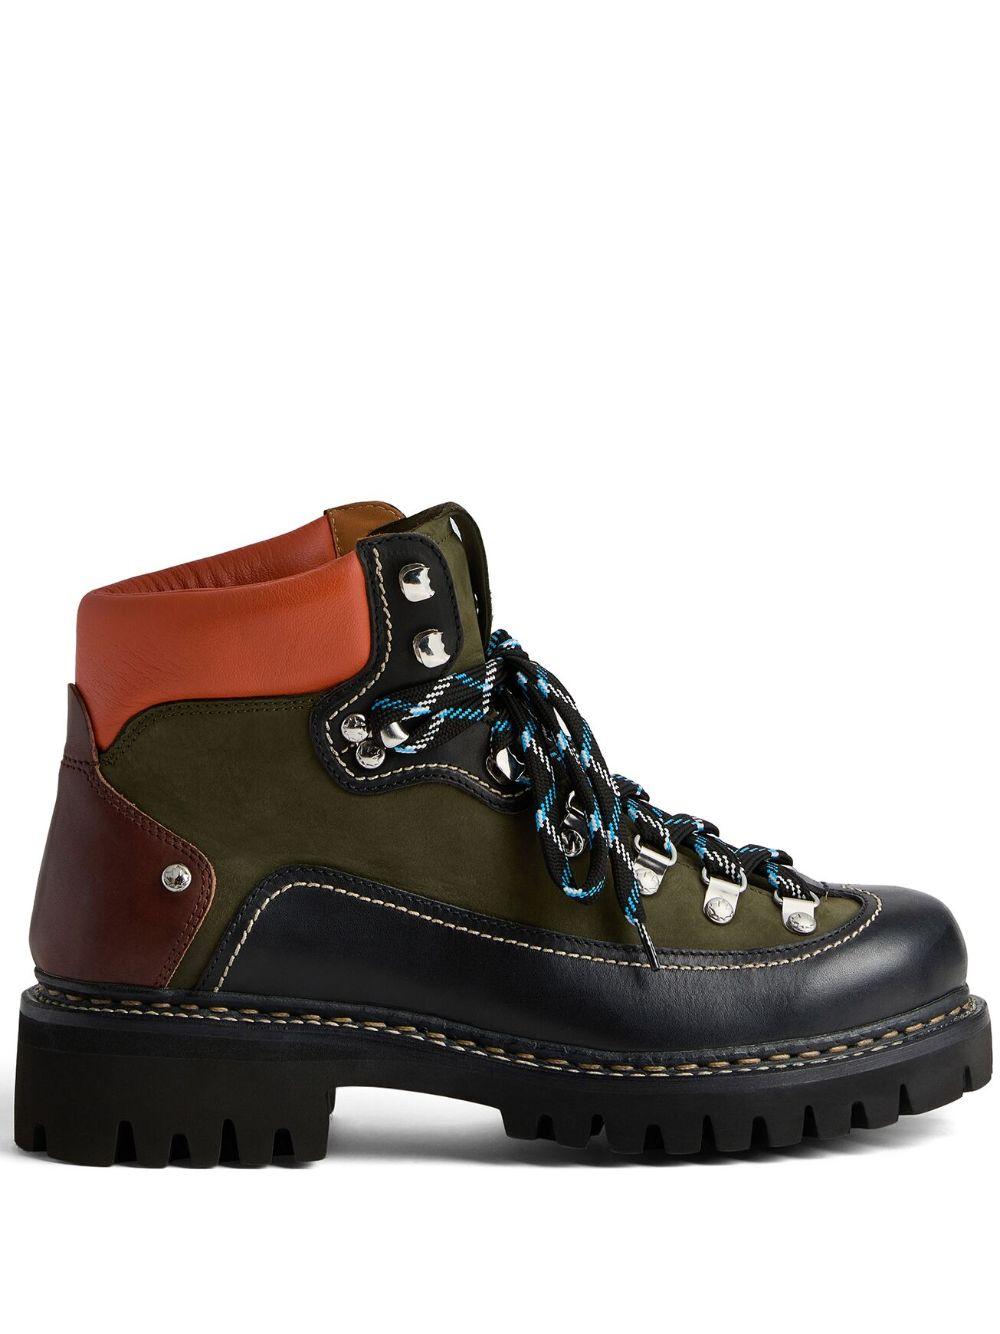 DSquared² Panelled Leather Hiking Boots in Black for Men | Lyst